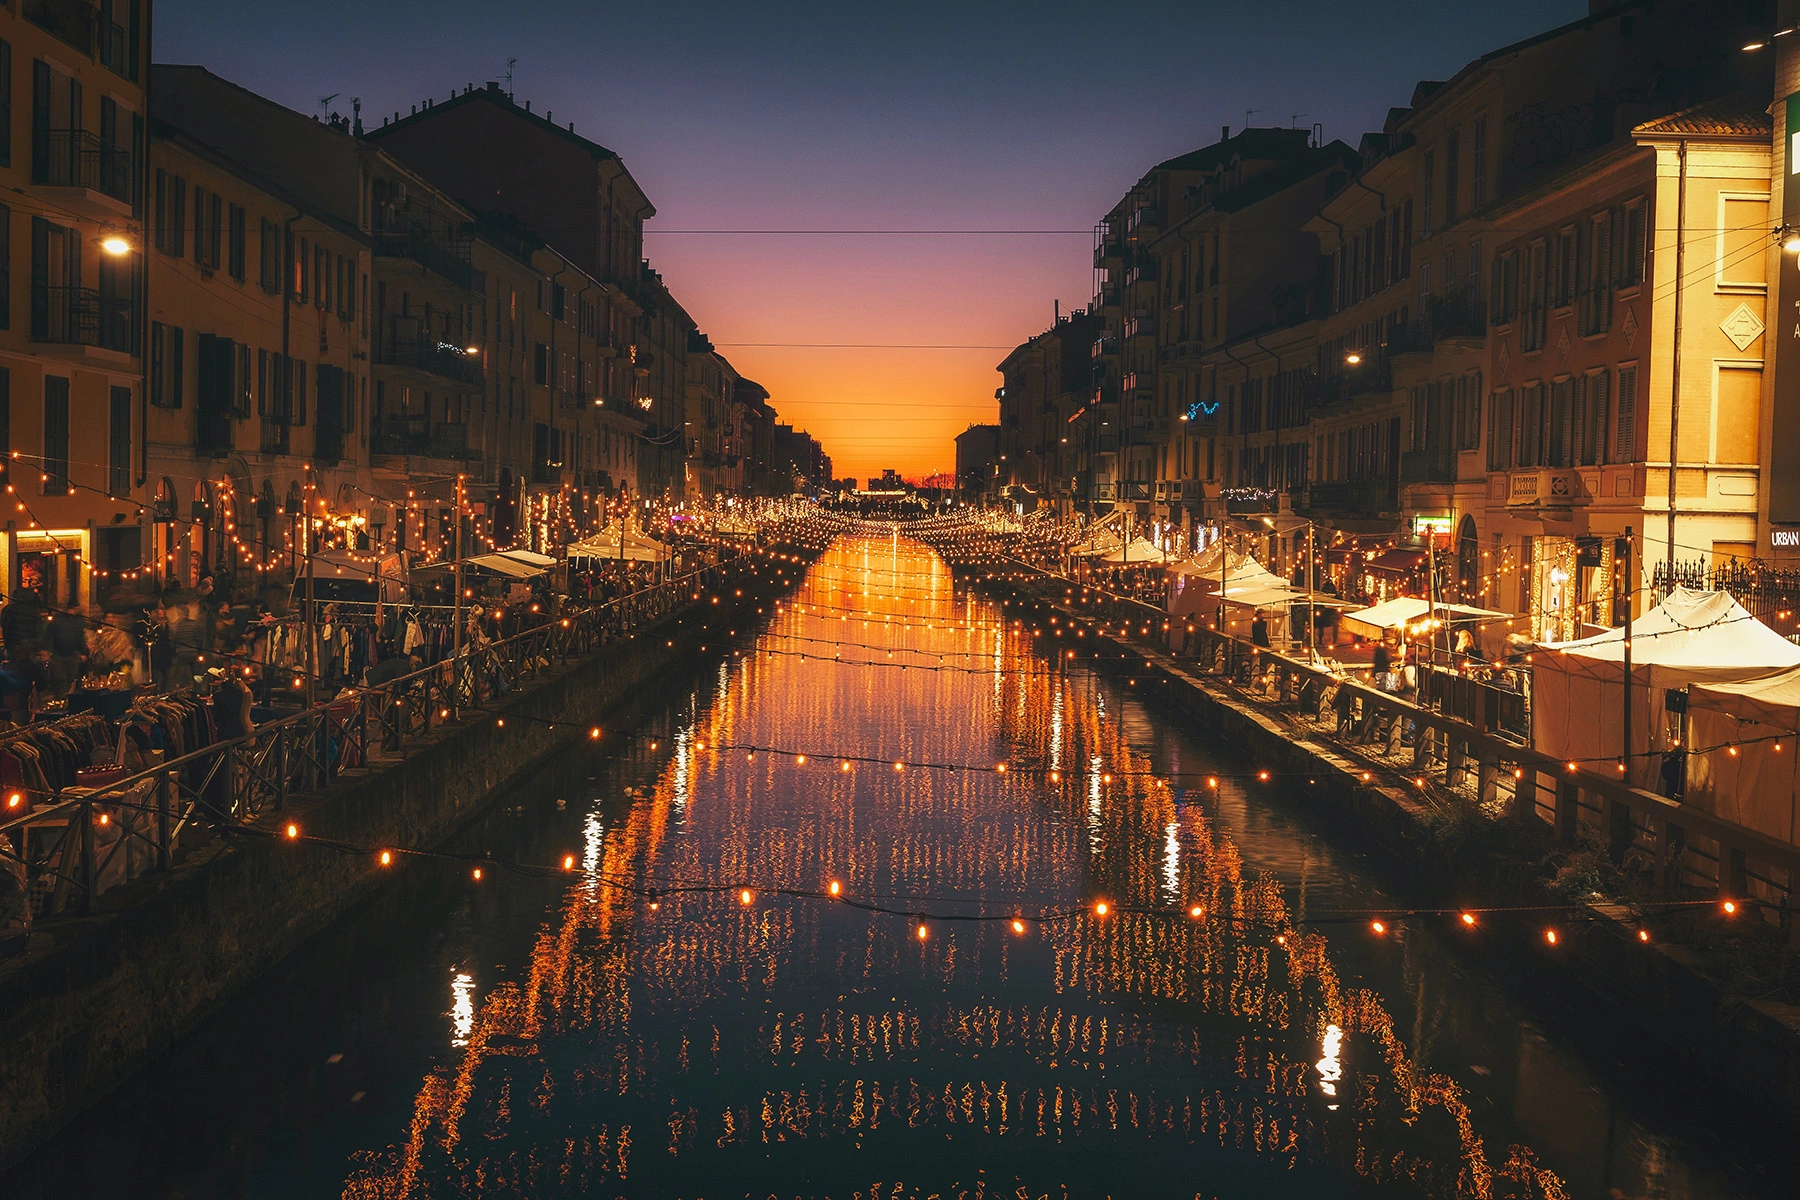 Alzaia Naviglio Grande in Milan, Italy. Lights hang over a canal in the evening while people dine outside.